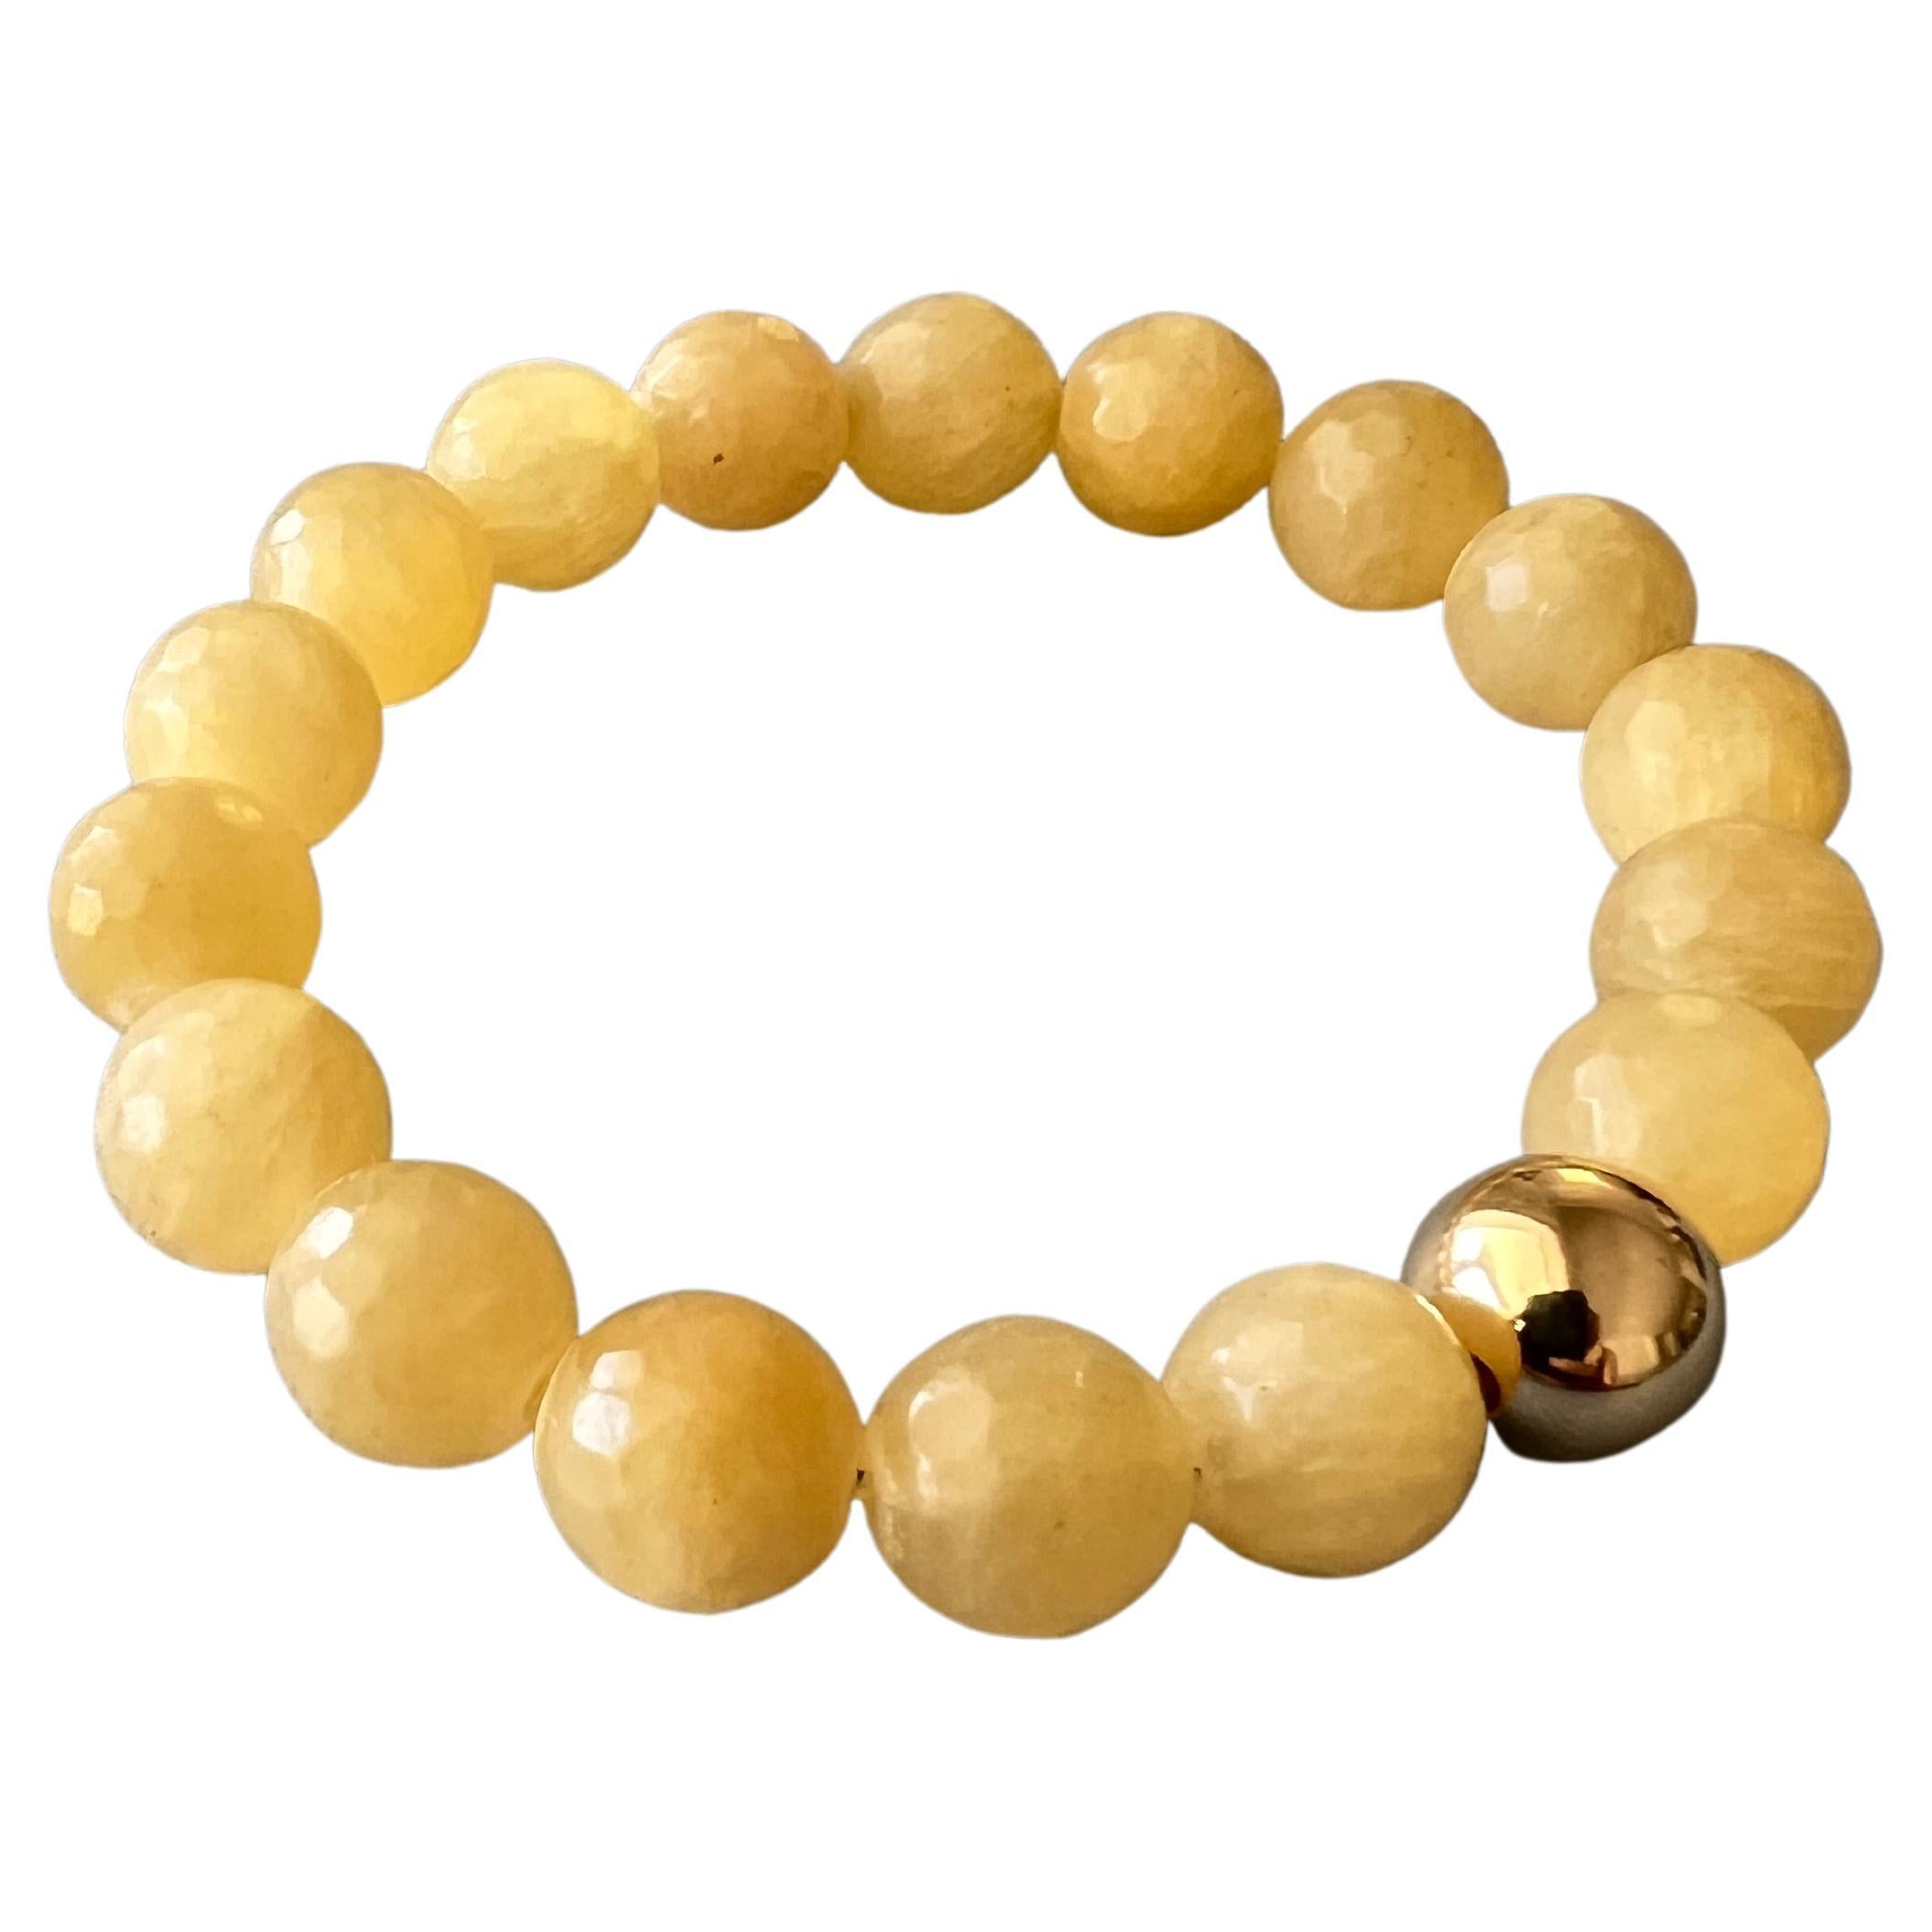 Yellow Calcite Faceted Round Bead Stackable Elastic Bracelet with Gold Filled Bead 

Made in Los Angeles

Designer: J Dauphin

Note: Every bead is in same size.

The Yellow Calcite Round Bead Bracelet with Gold Filled Bead interweaves radiant